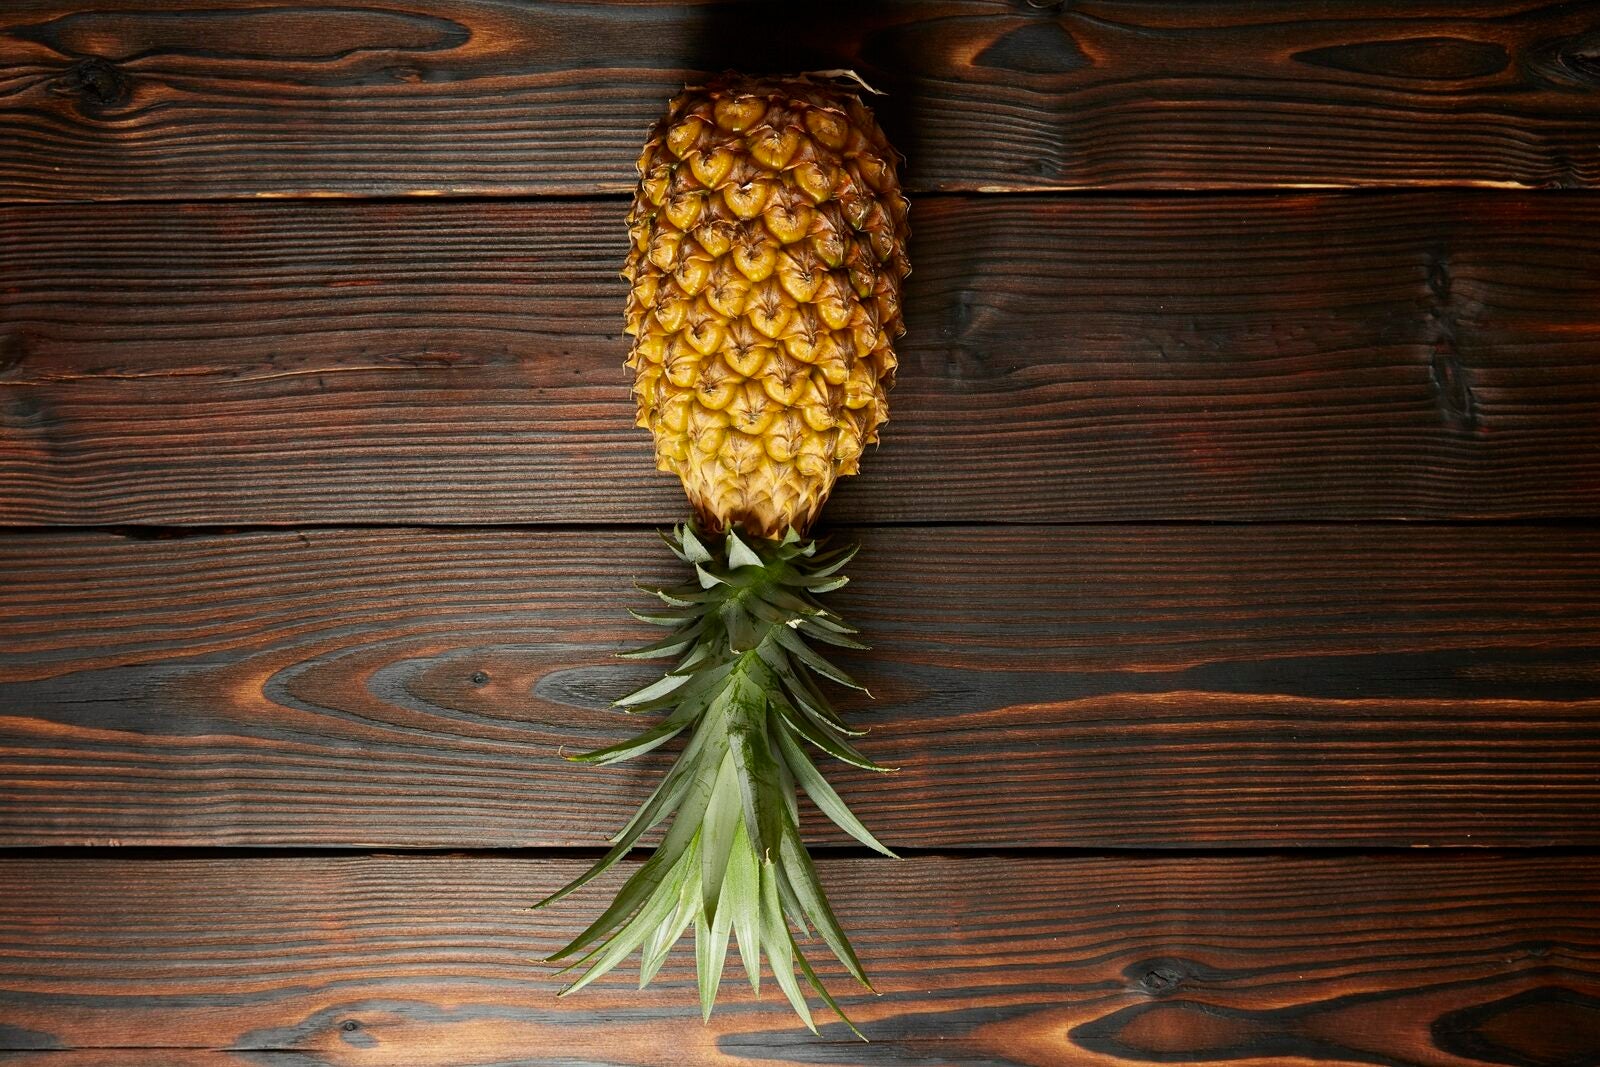 A pineapple lying on a wooden table, upside-down